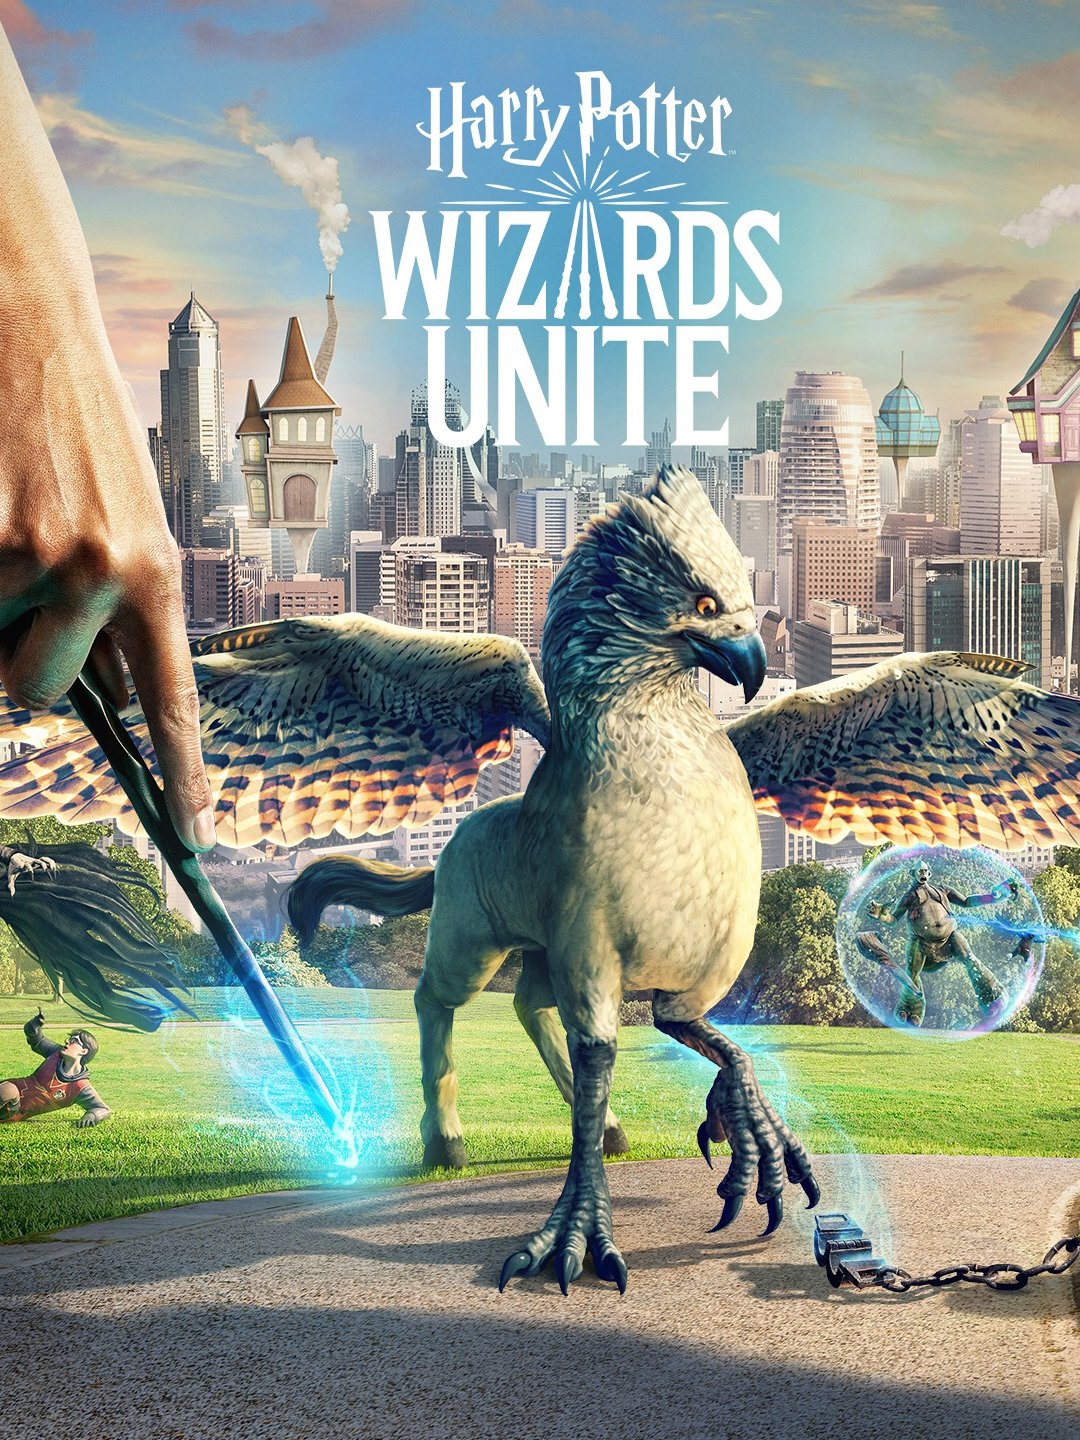 Image of Harry Potter: Wizards Unite